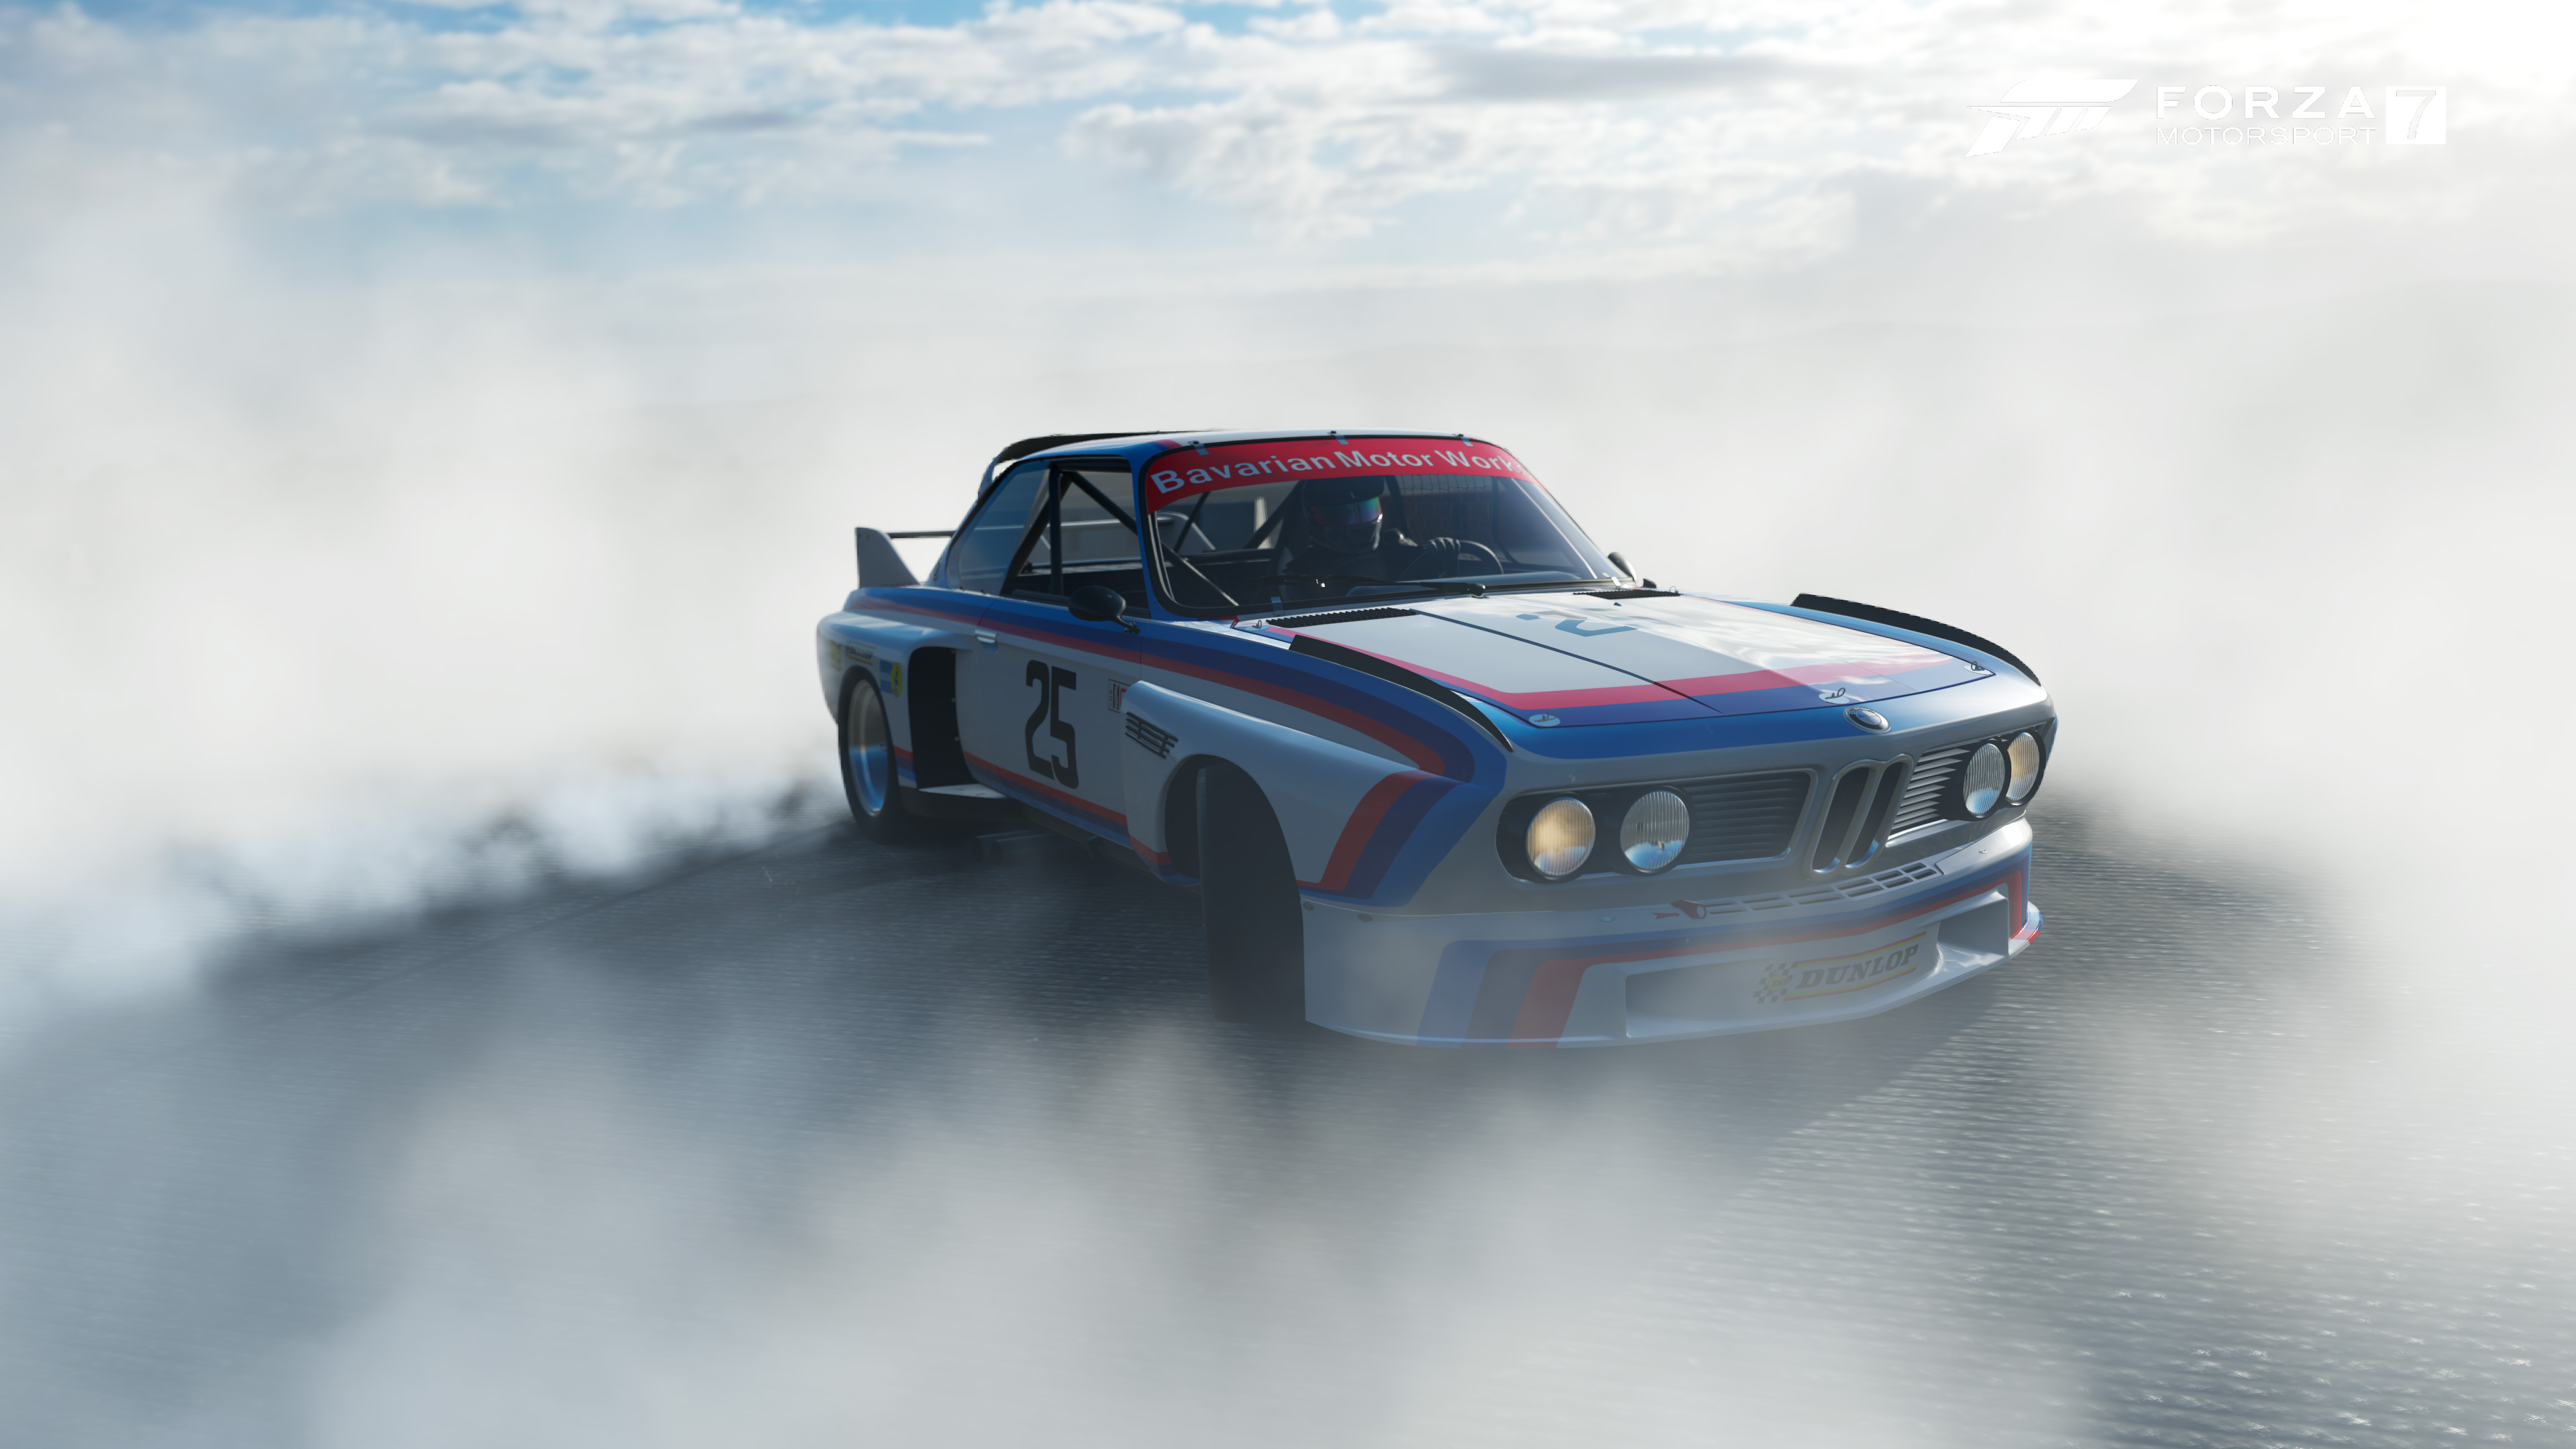 1976 Bmw Drifting Forza Motosport 7 4k, HD Games, 4k Wallpapers, Images - Drifting In Forza Motorsport 7